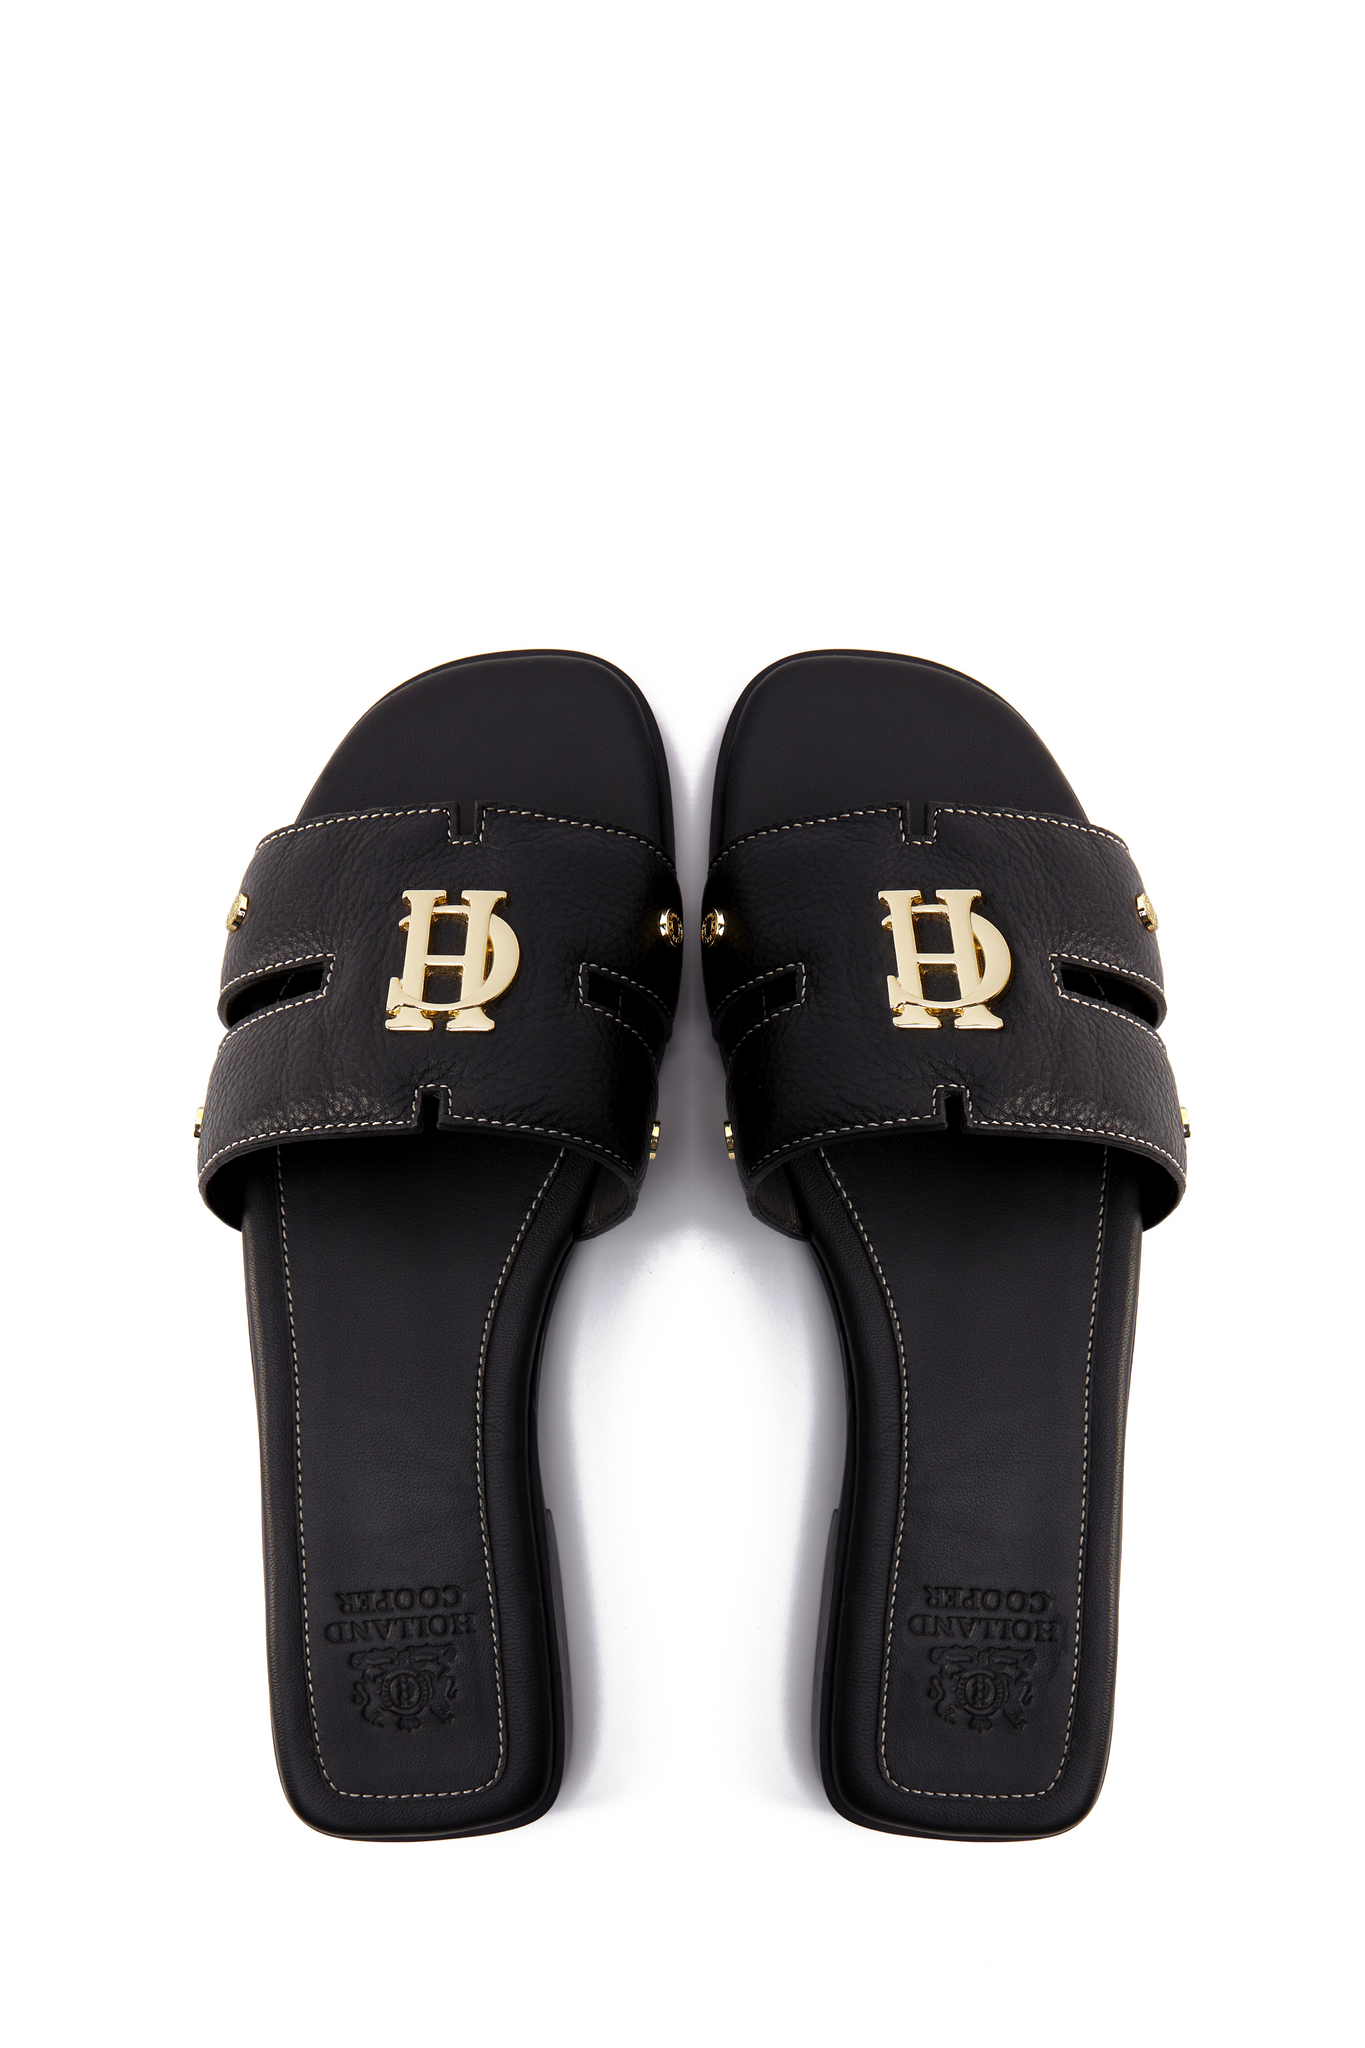 Birds eye view of black leather sliders with contrast white stitching, a black leather sole and gold hardware